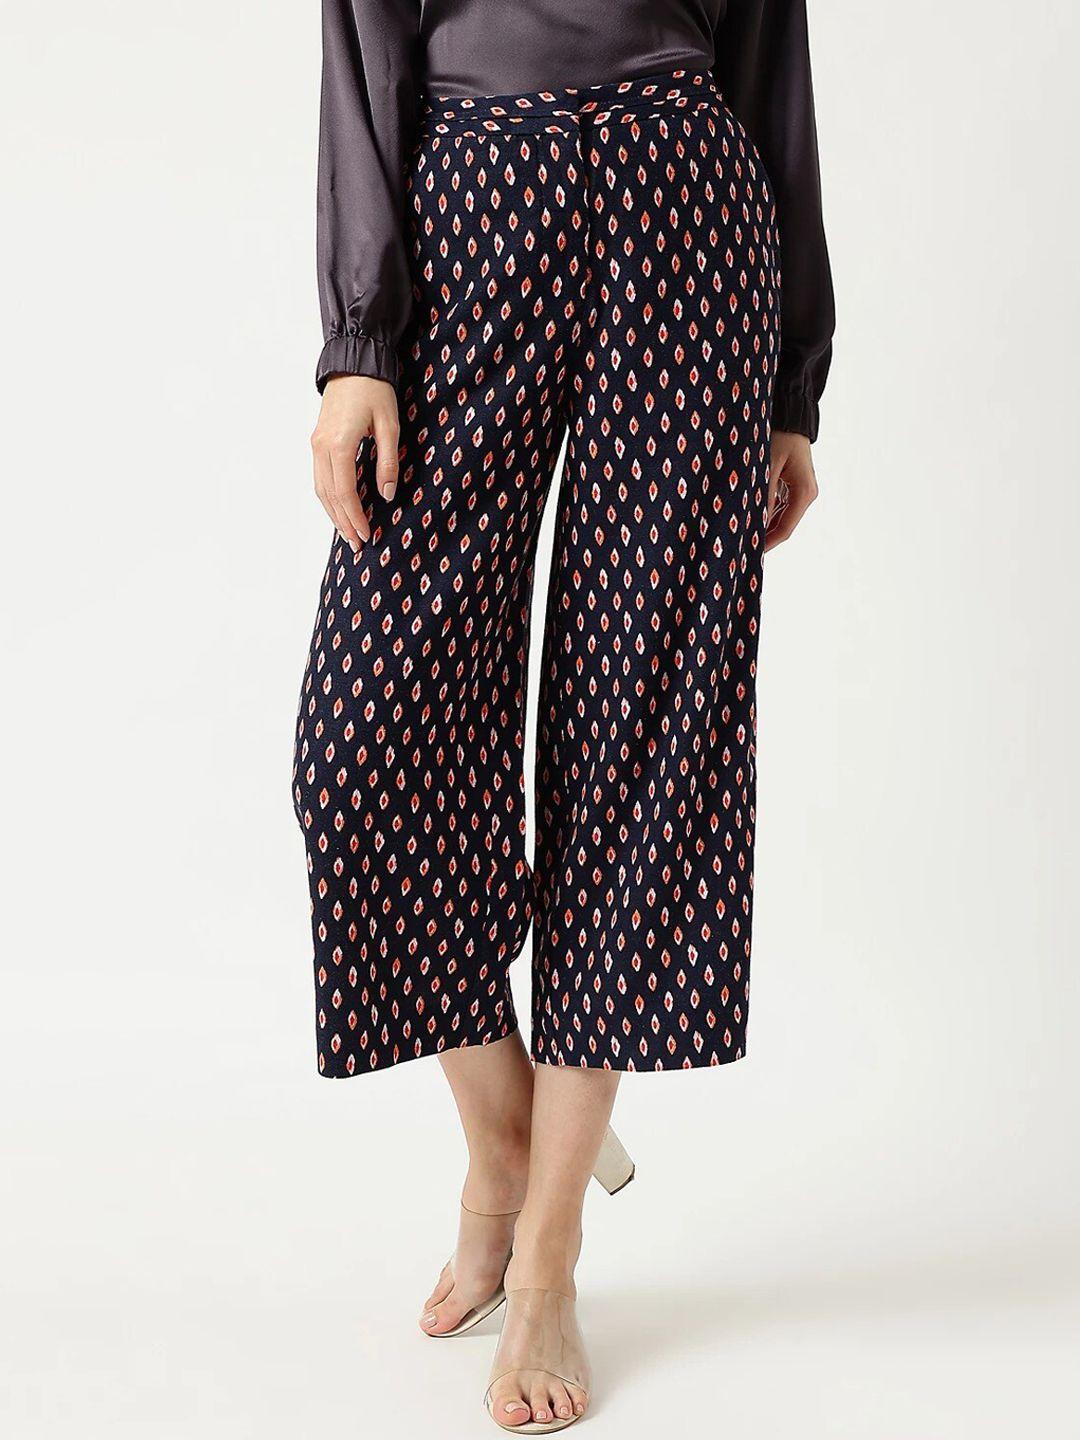 marks & spencer women multicoloured printed high-rise culottes trousers